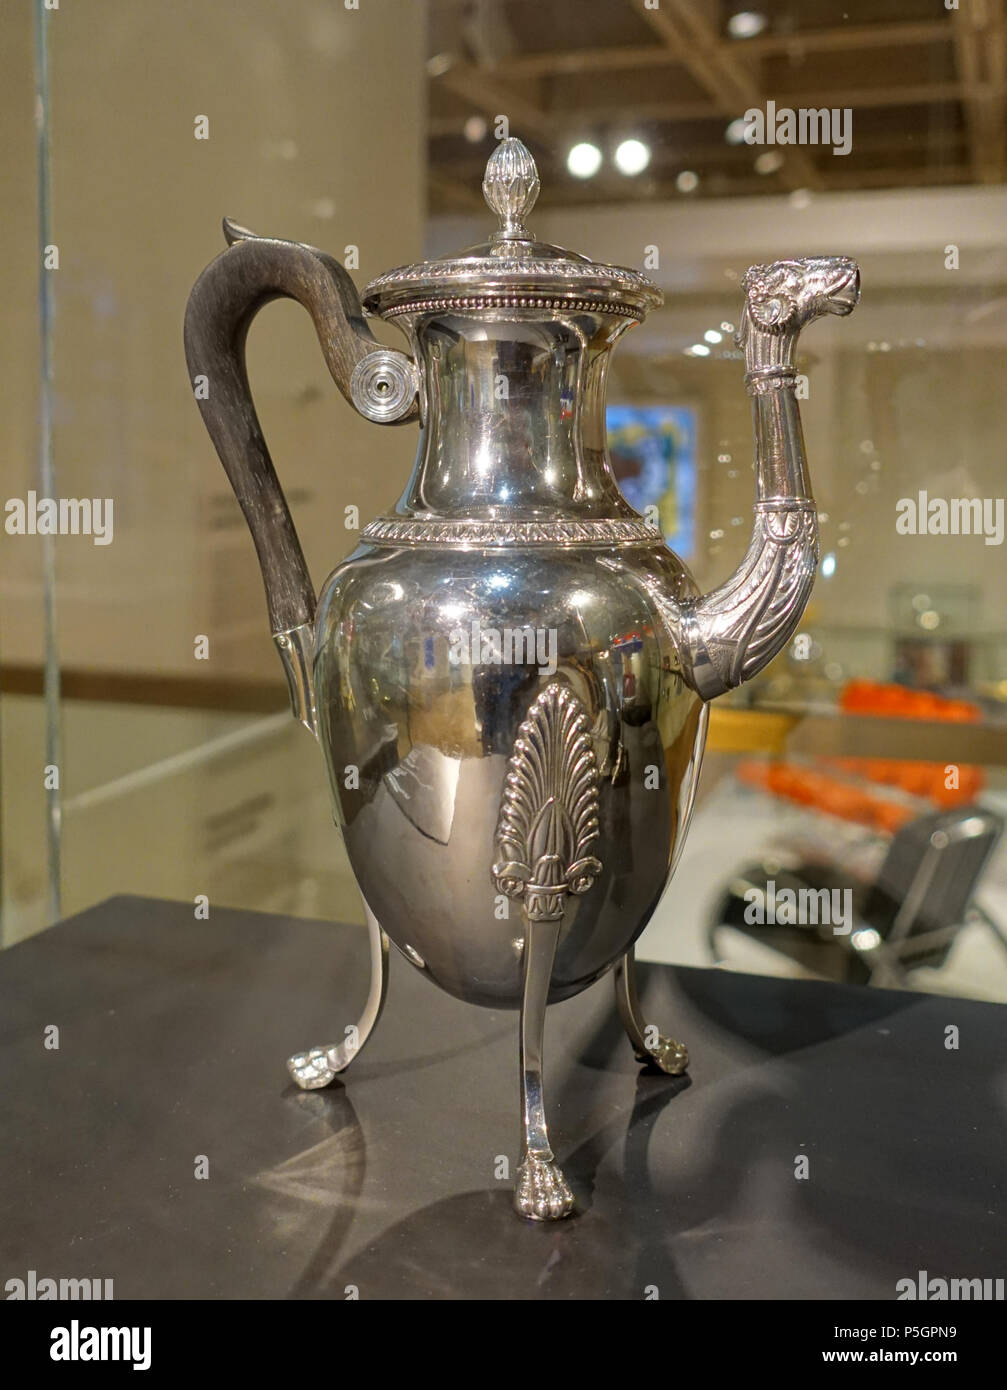 N/A. English: Exhibit in the Montreal Museum of Fine Arts - Montreal, Quebec, Canada. 28 September 2016, 11:45:56. Daderot 364 Coffee pot by Louis Legay, Paris, c. 1820, silver, ebony - Montreal Museum of Fine Arts - Montreal, Canada - DSC08955 Stock Photo